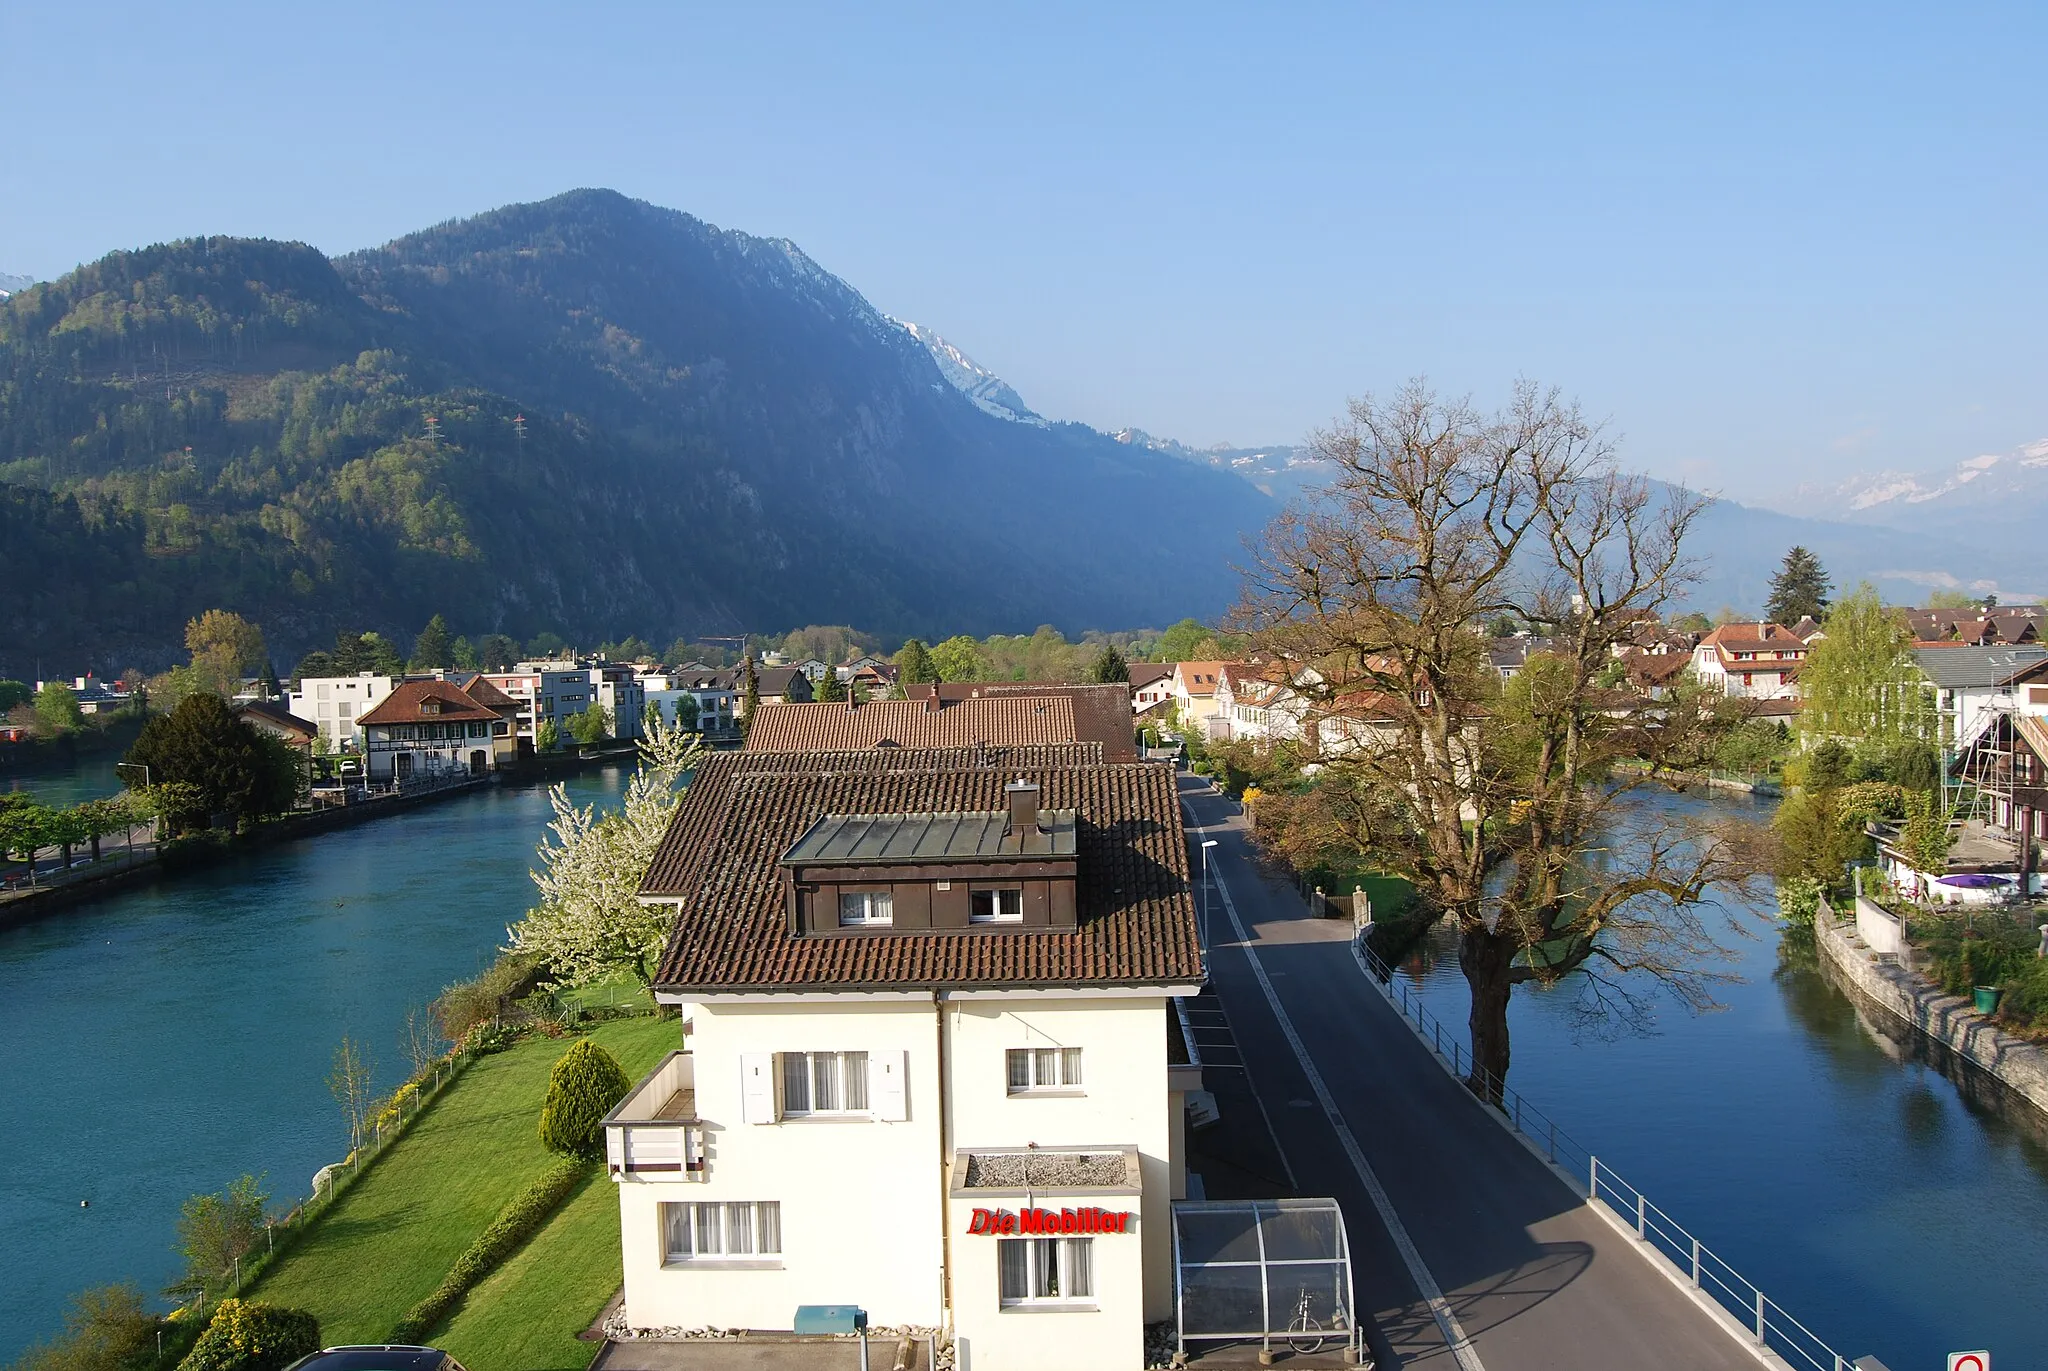 Photo showing: Island on Aar at Unterseen (sight from Hotel Central), canton of Bern, Switzerland